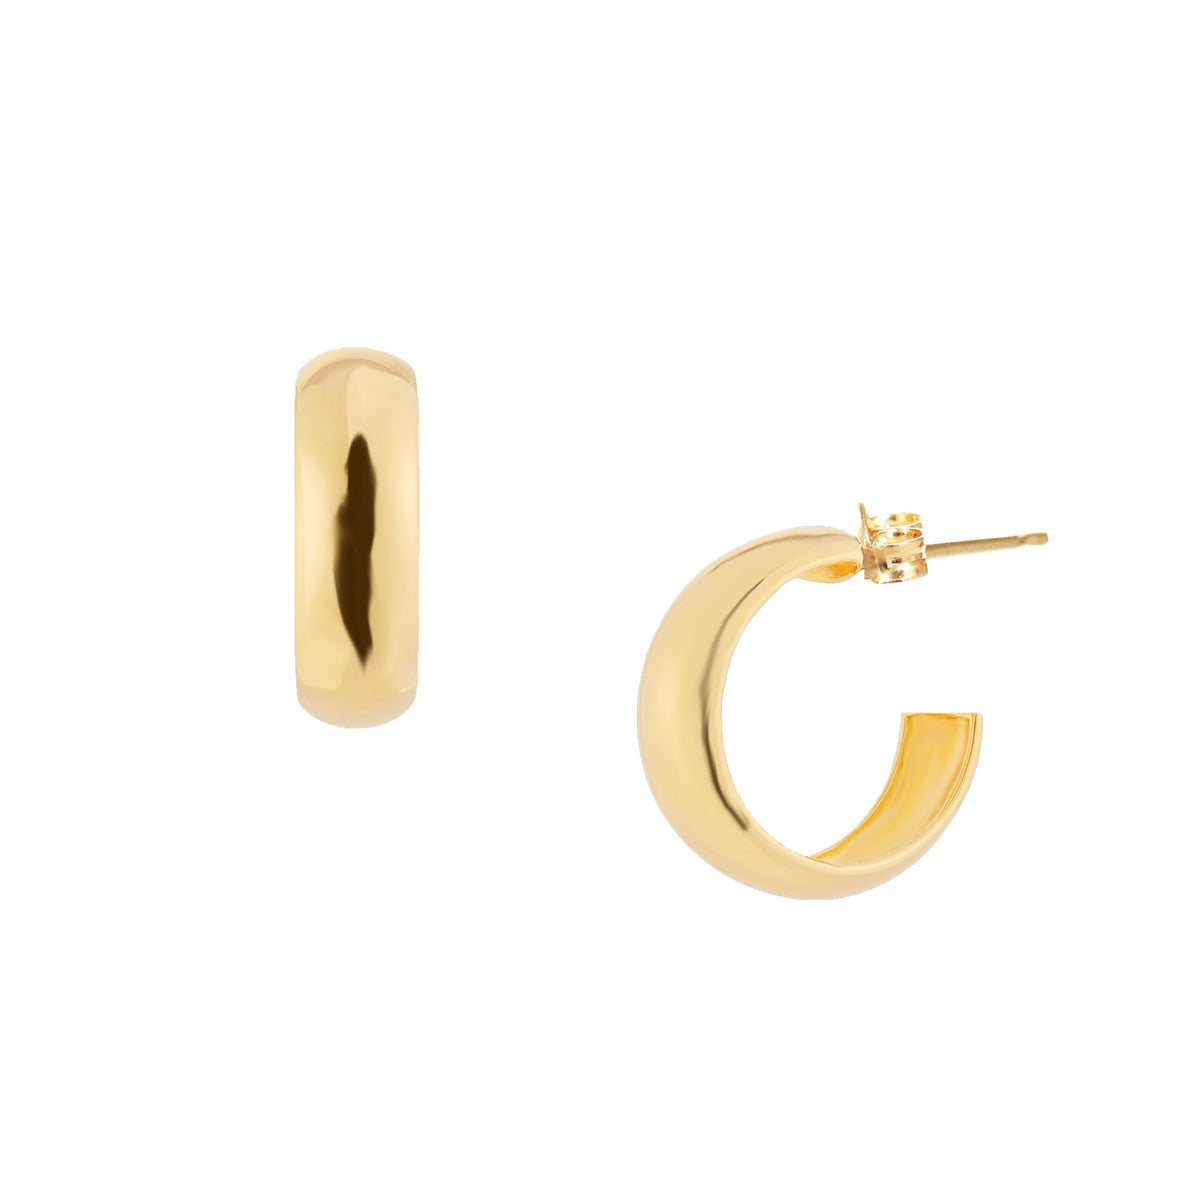 POISE HUGGIE HOOPS - 14K SOLID GOLD - SO PRETTY CARA COTTER